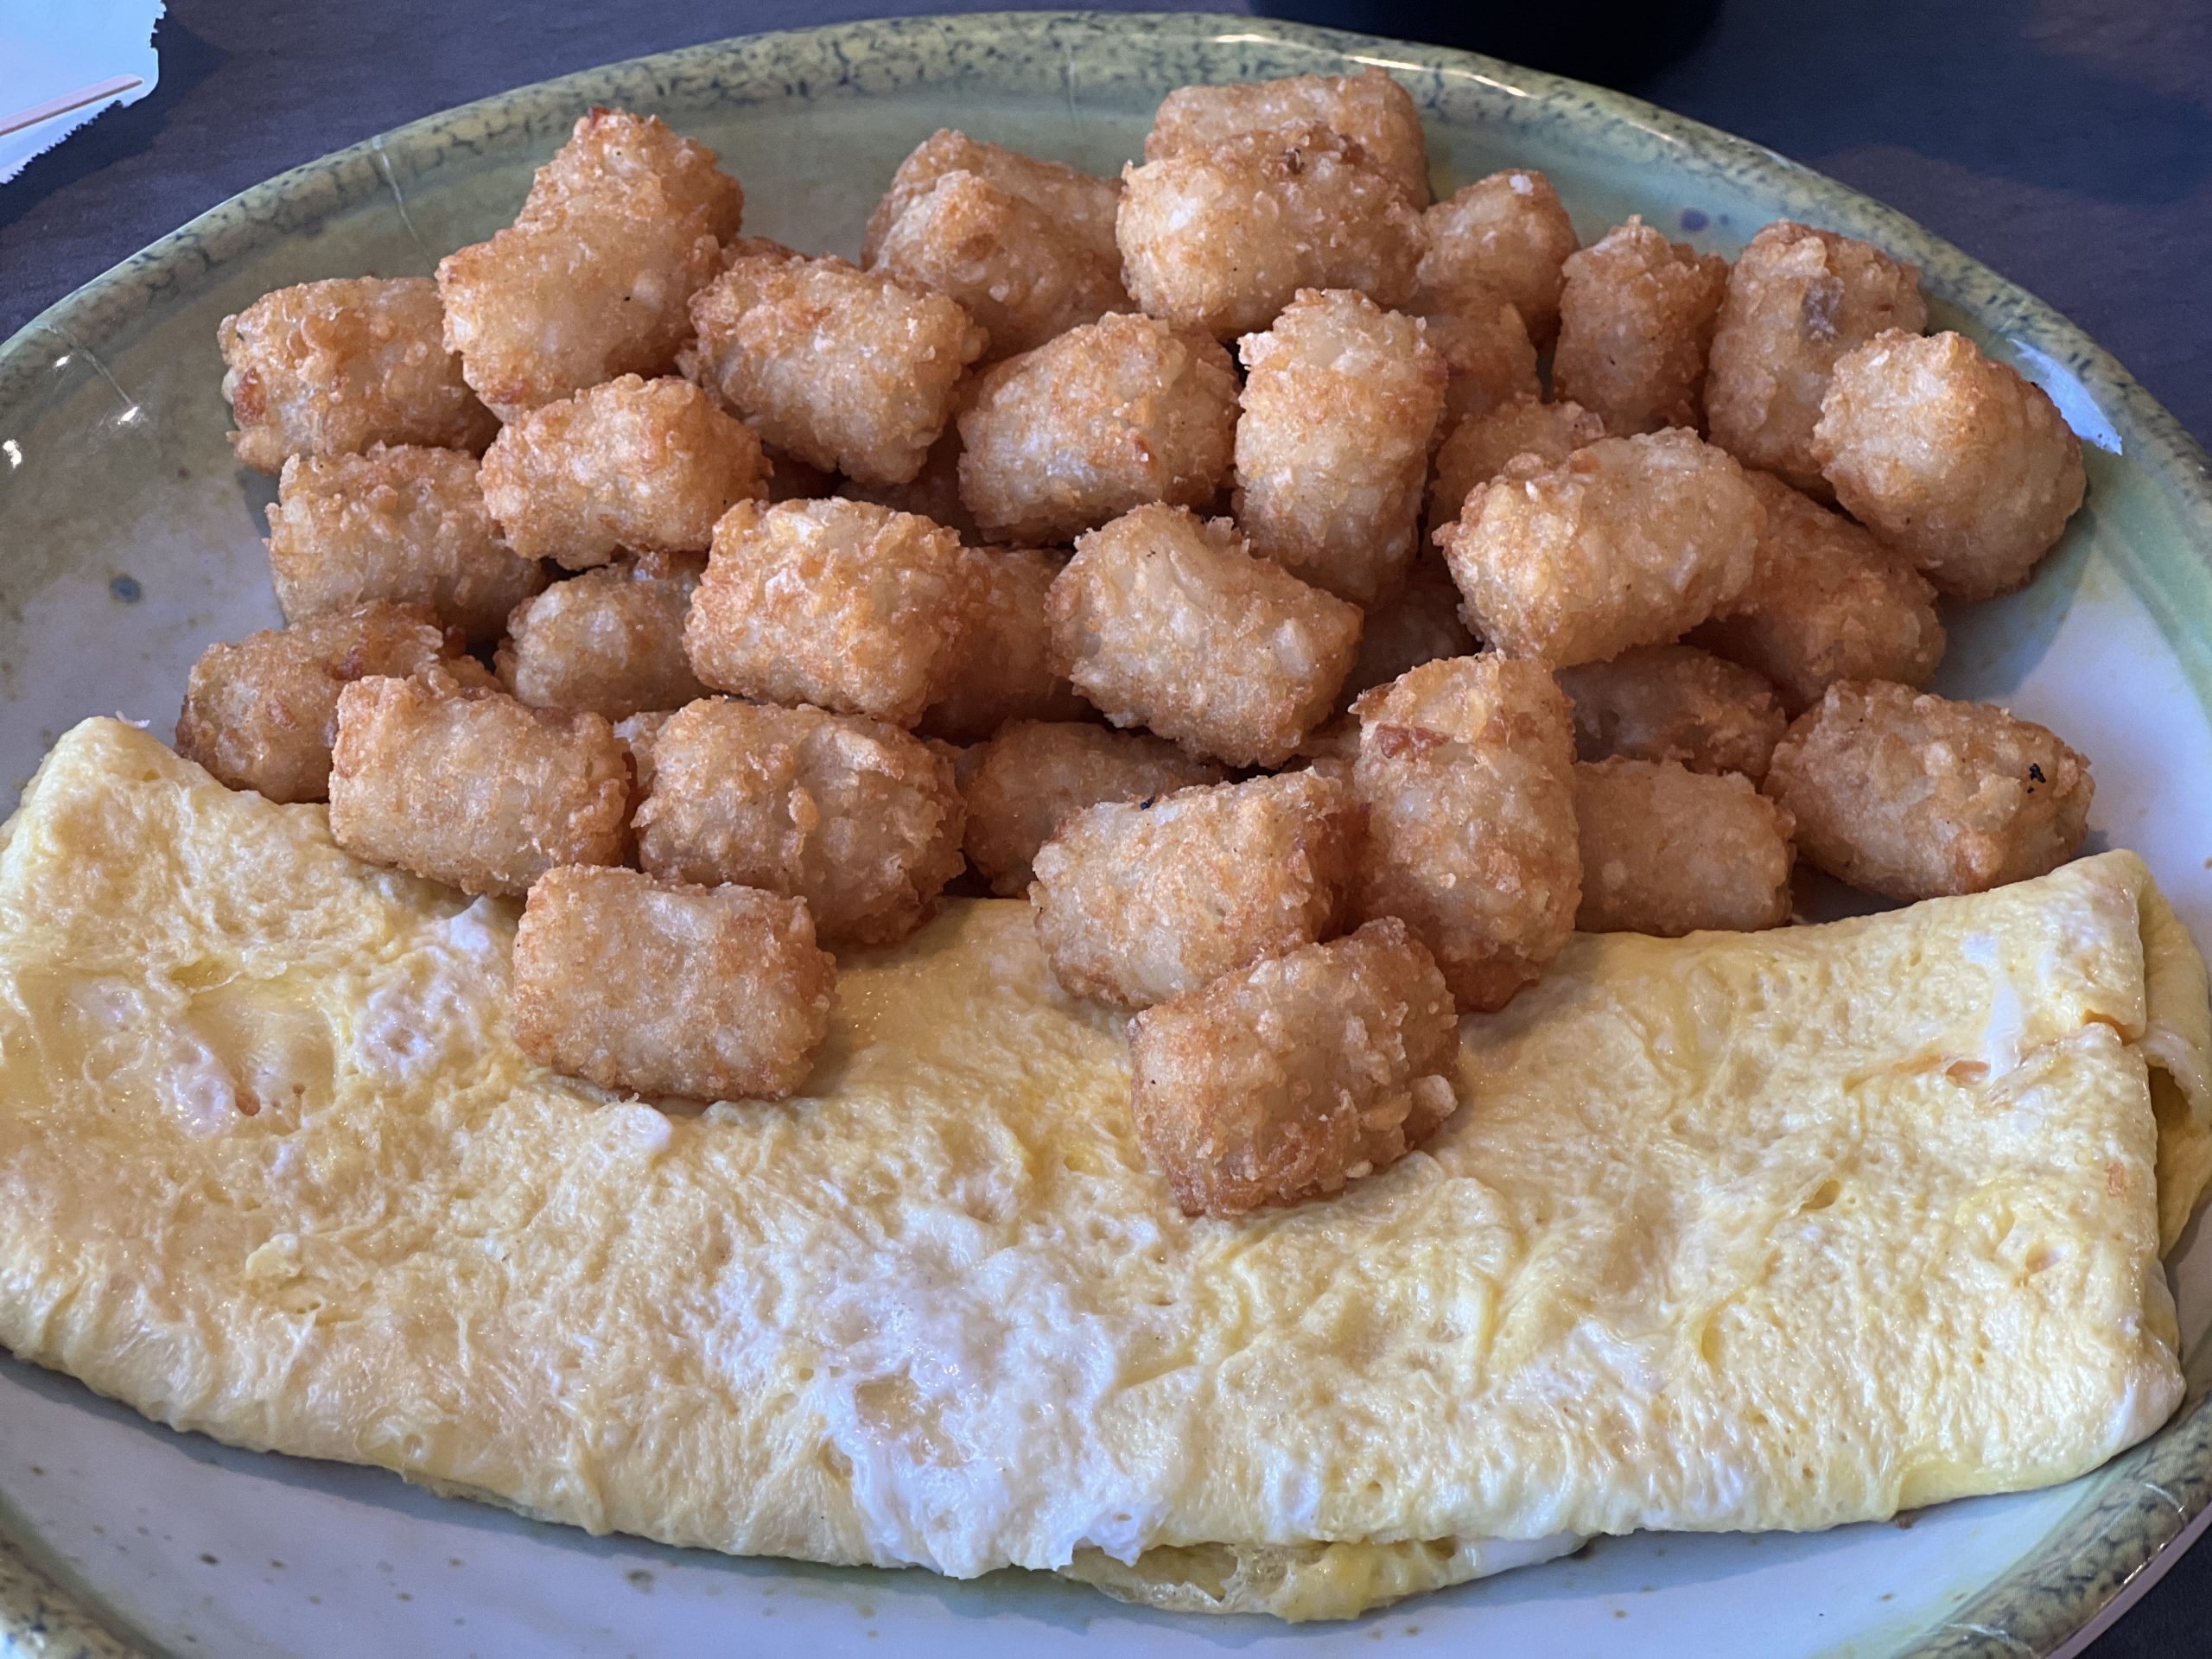 Marvis Pancake House in North Wildwood Egg omelet with tater tots